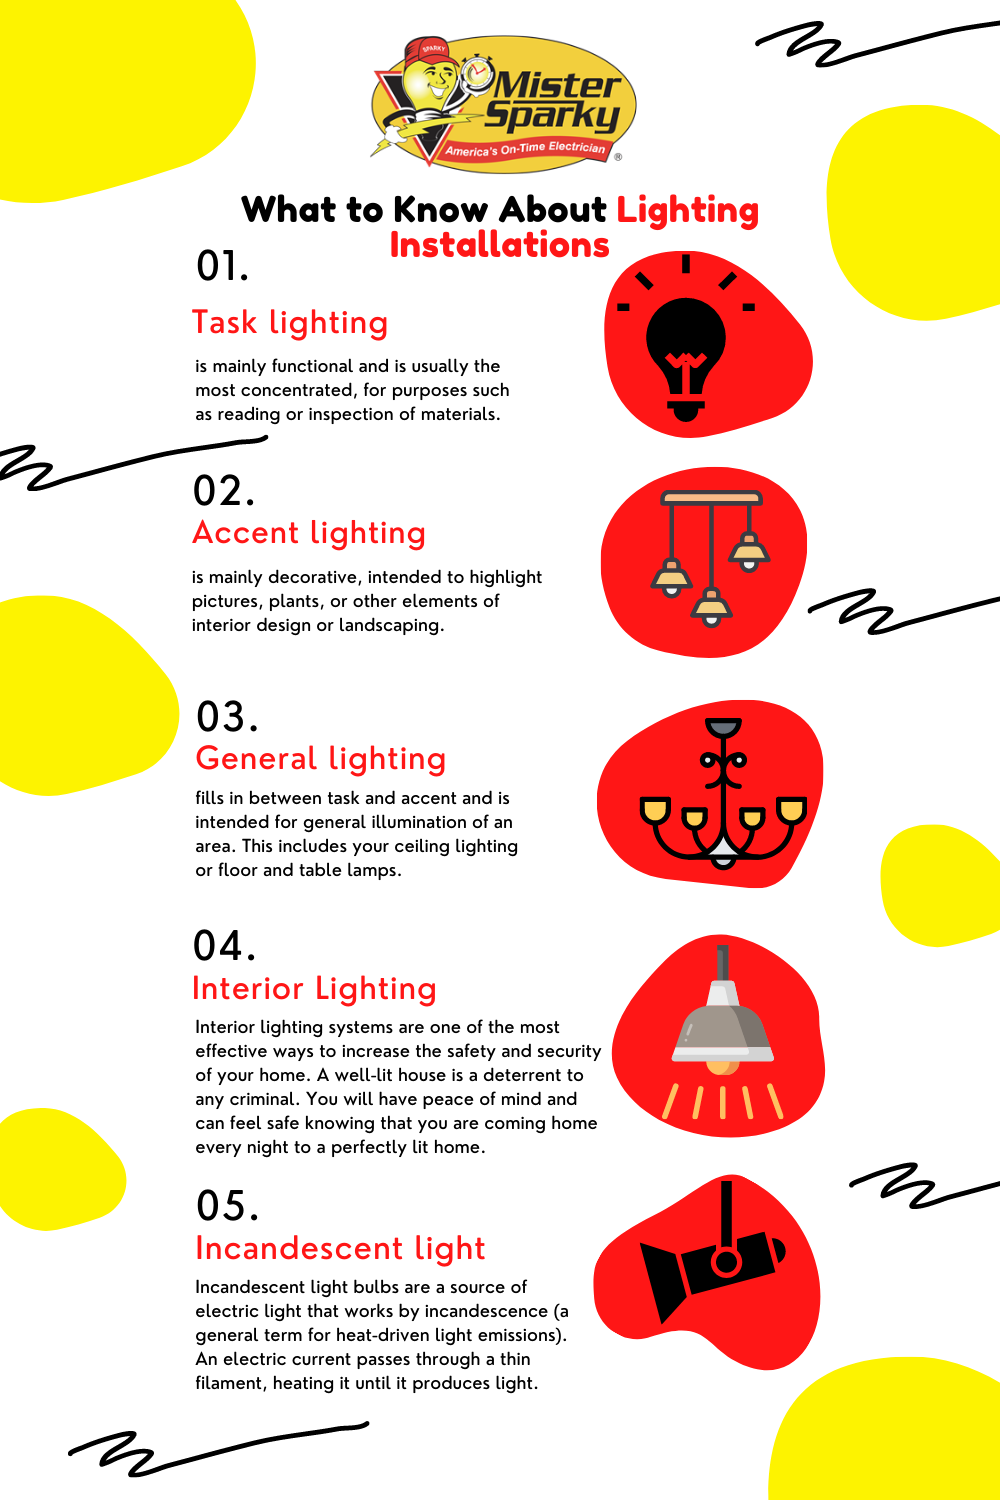 This is an infographic for What to Know About Lighting Installations